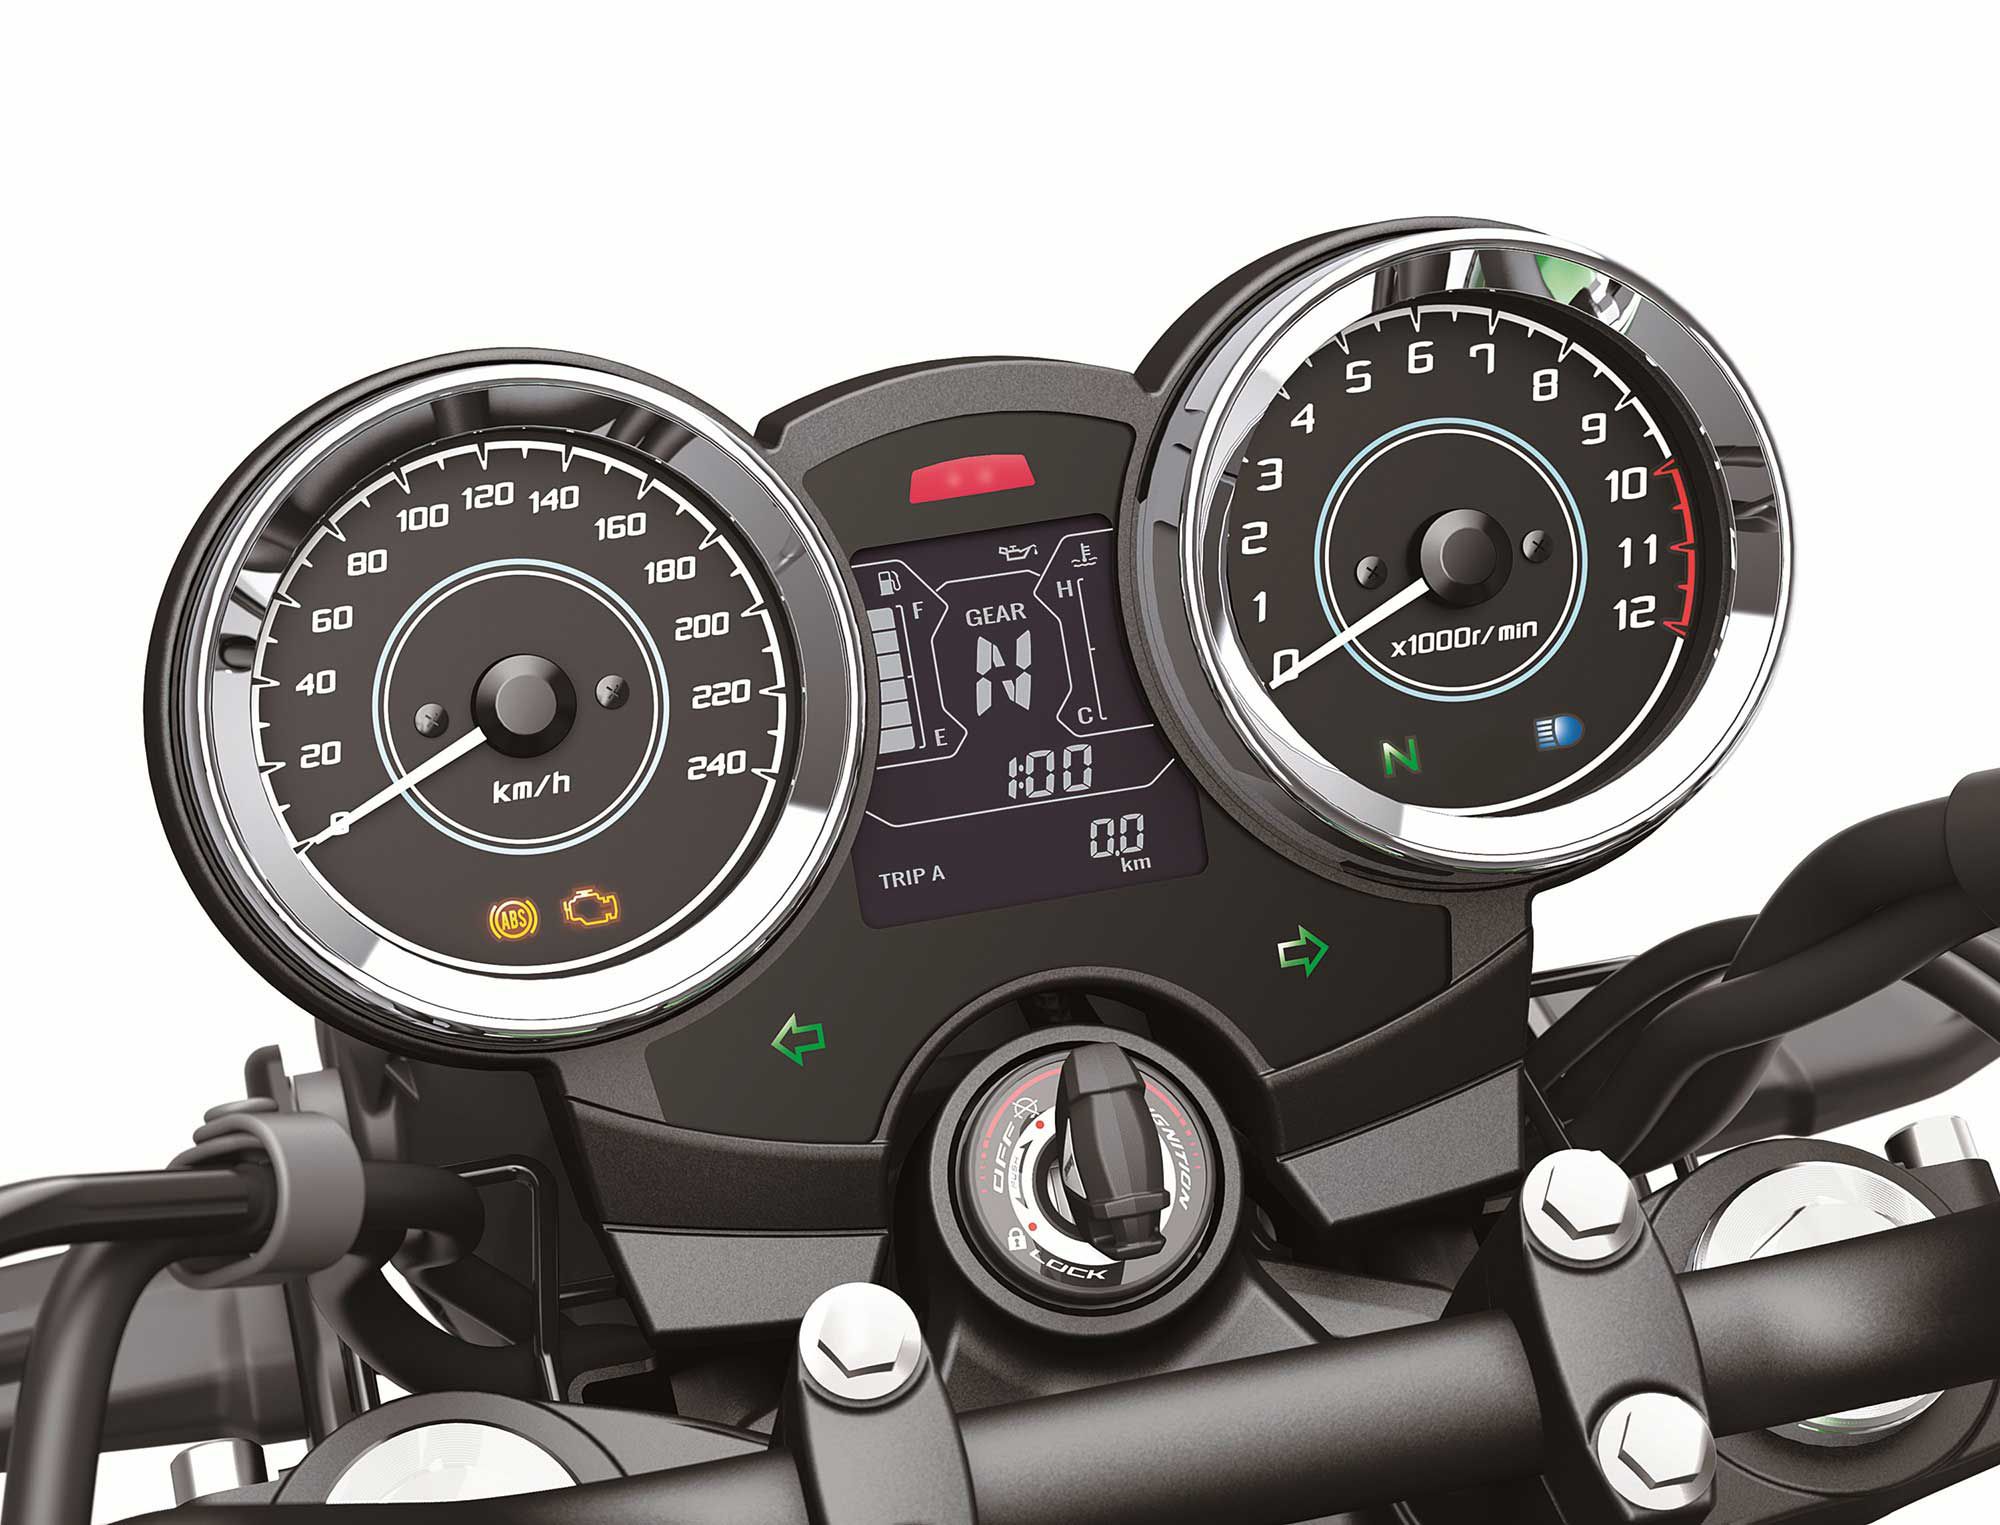 Dual dial instrument panels with a centralized LCD screen.